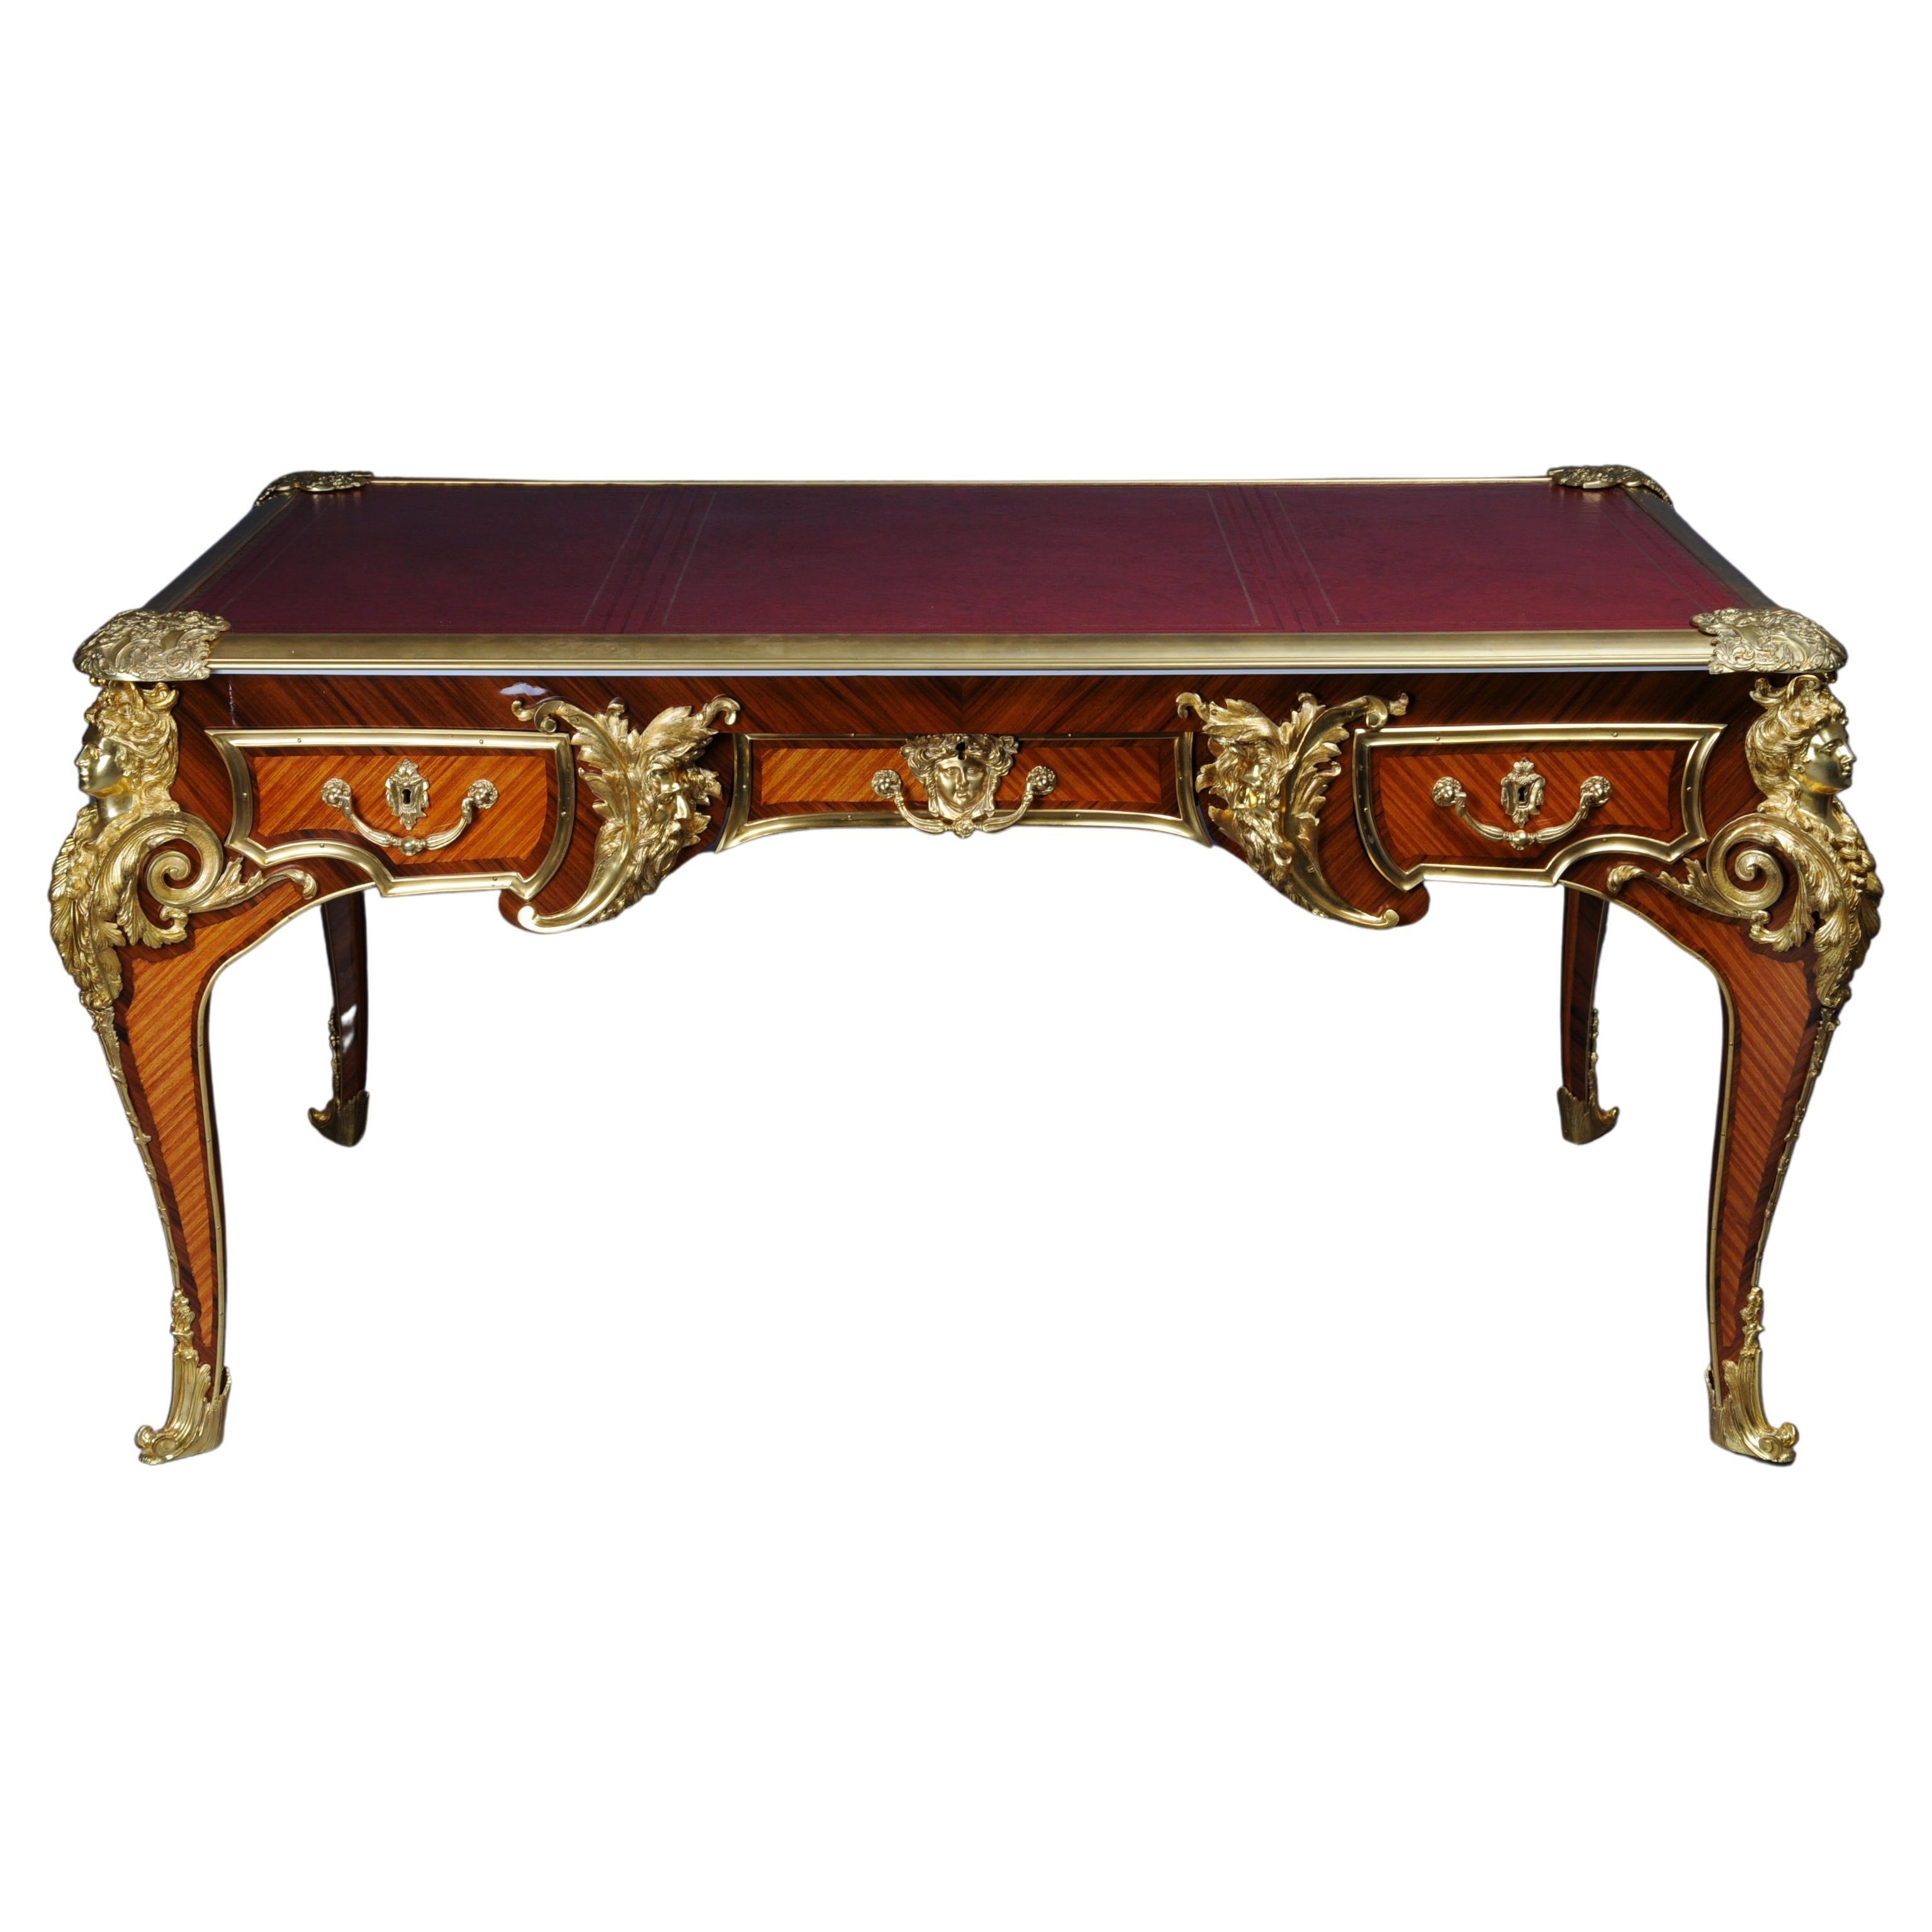 20th Century Bureau Plat or Desk by the Model of Andre Charles Boulle